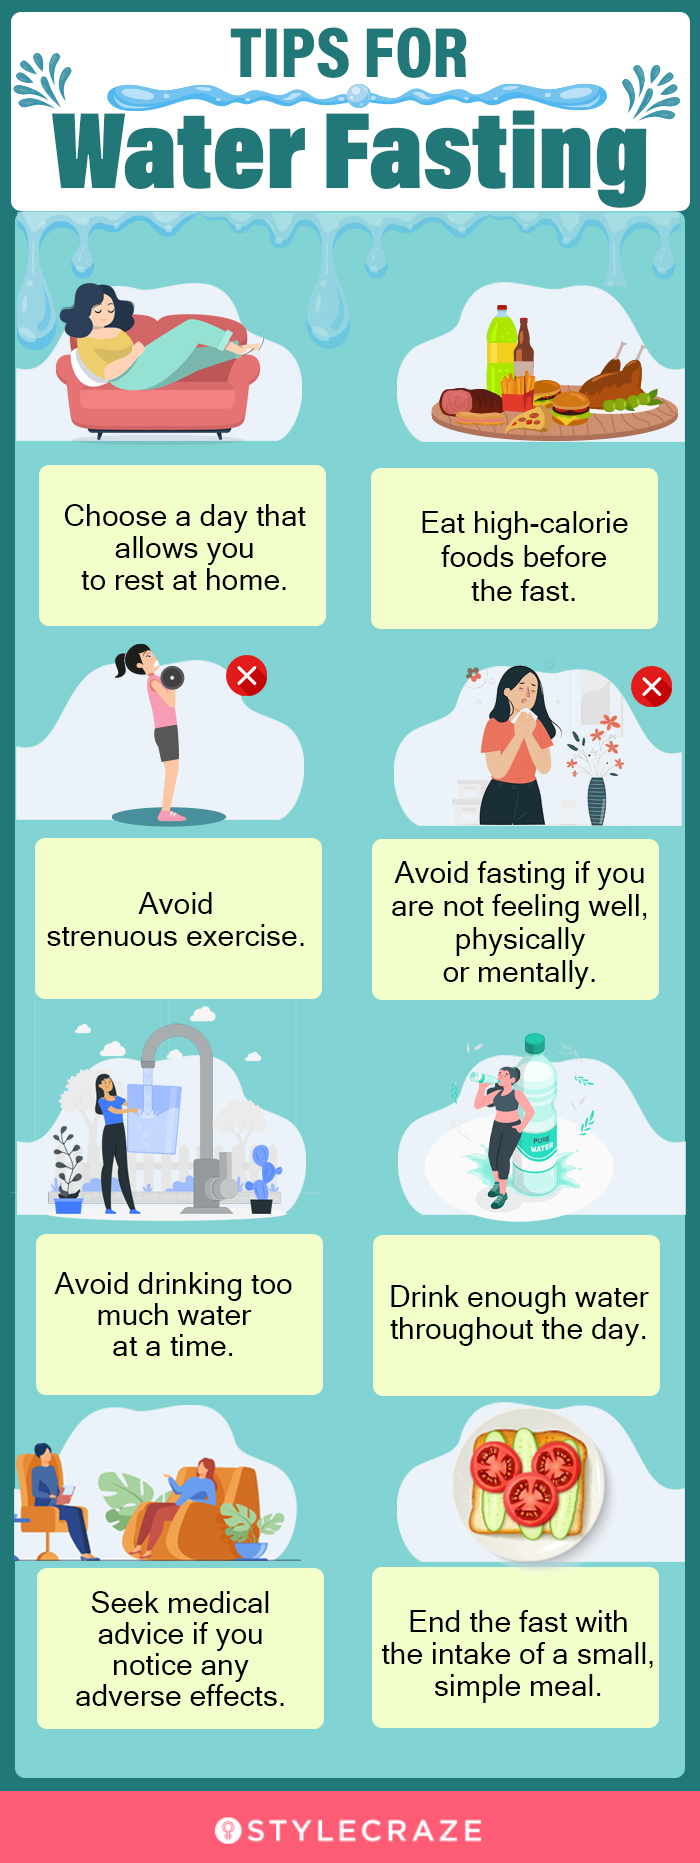 tips for water fasting [infographic]